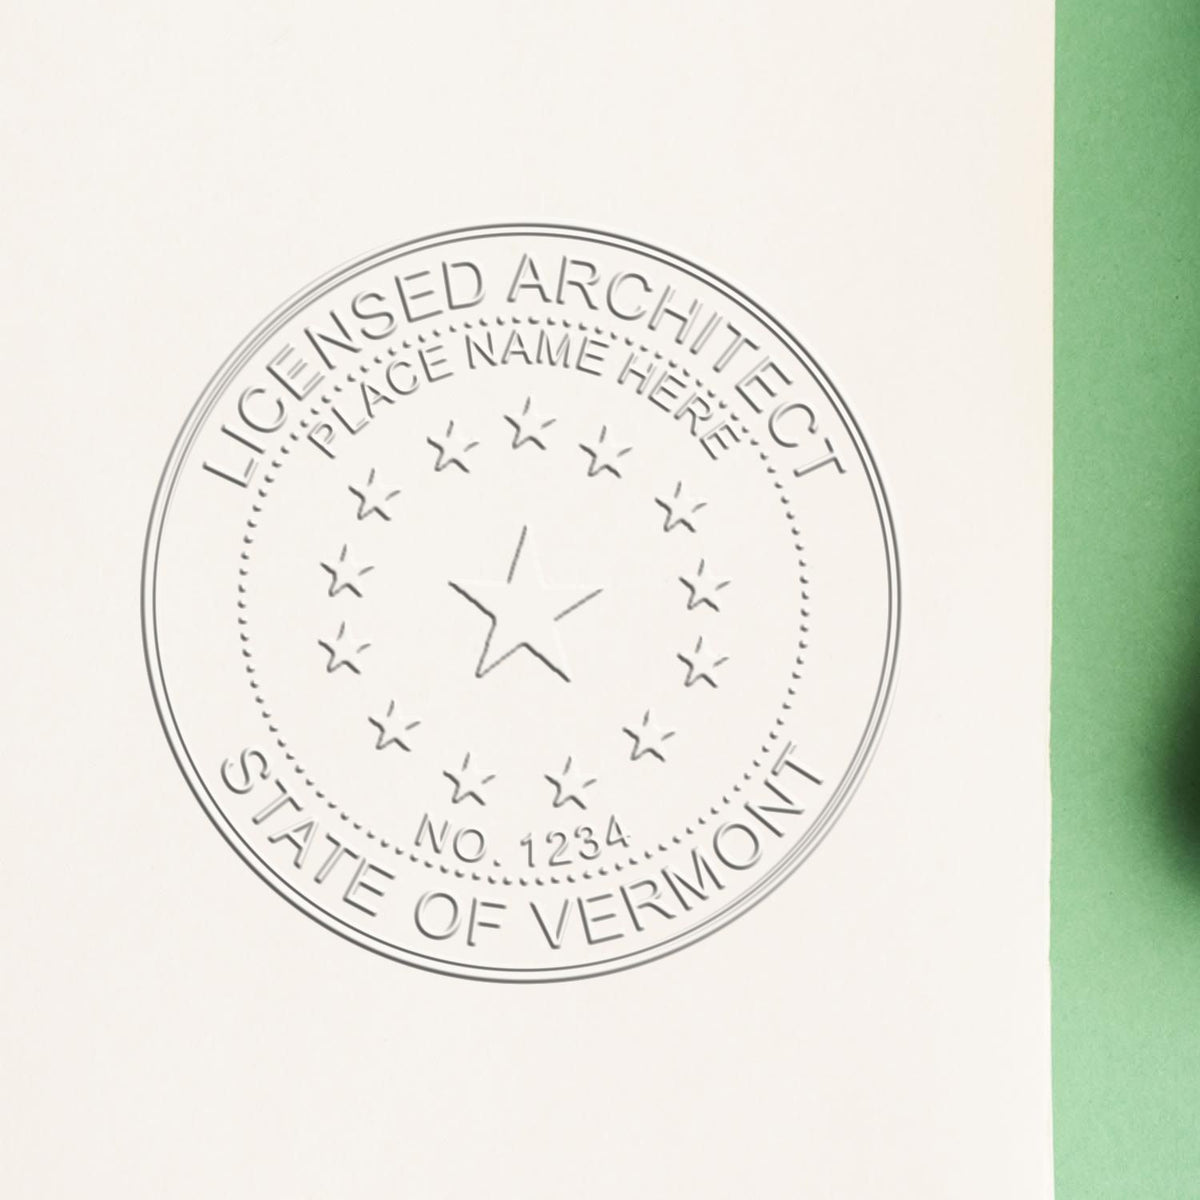 A stamped impression of the State of Vermont Architectural Seal Embosser in this stylish lifestyle photo, setting the tone for a unique and personalized product.